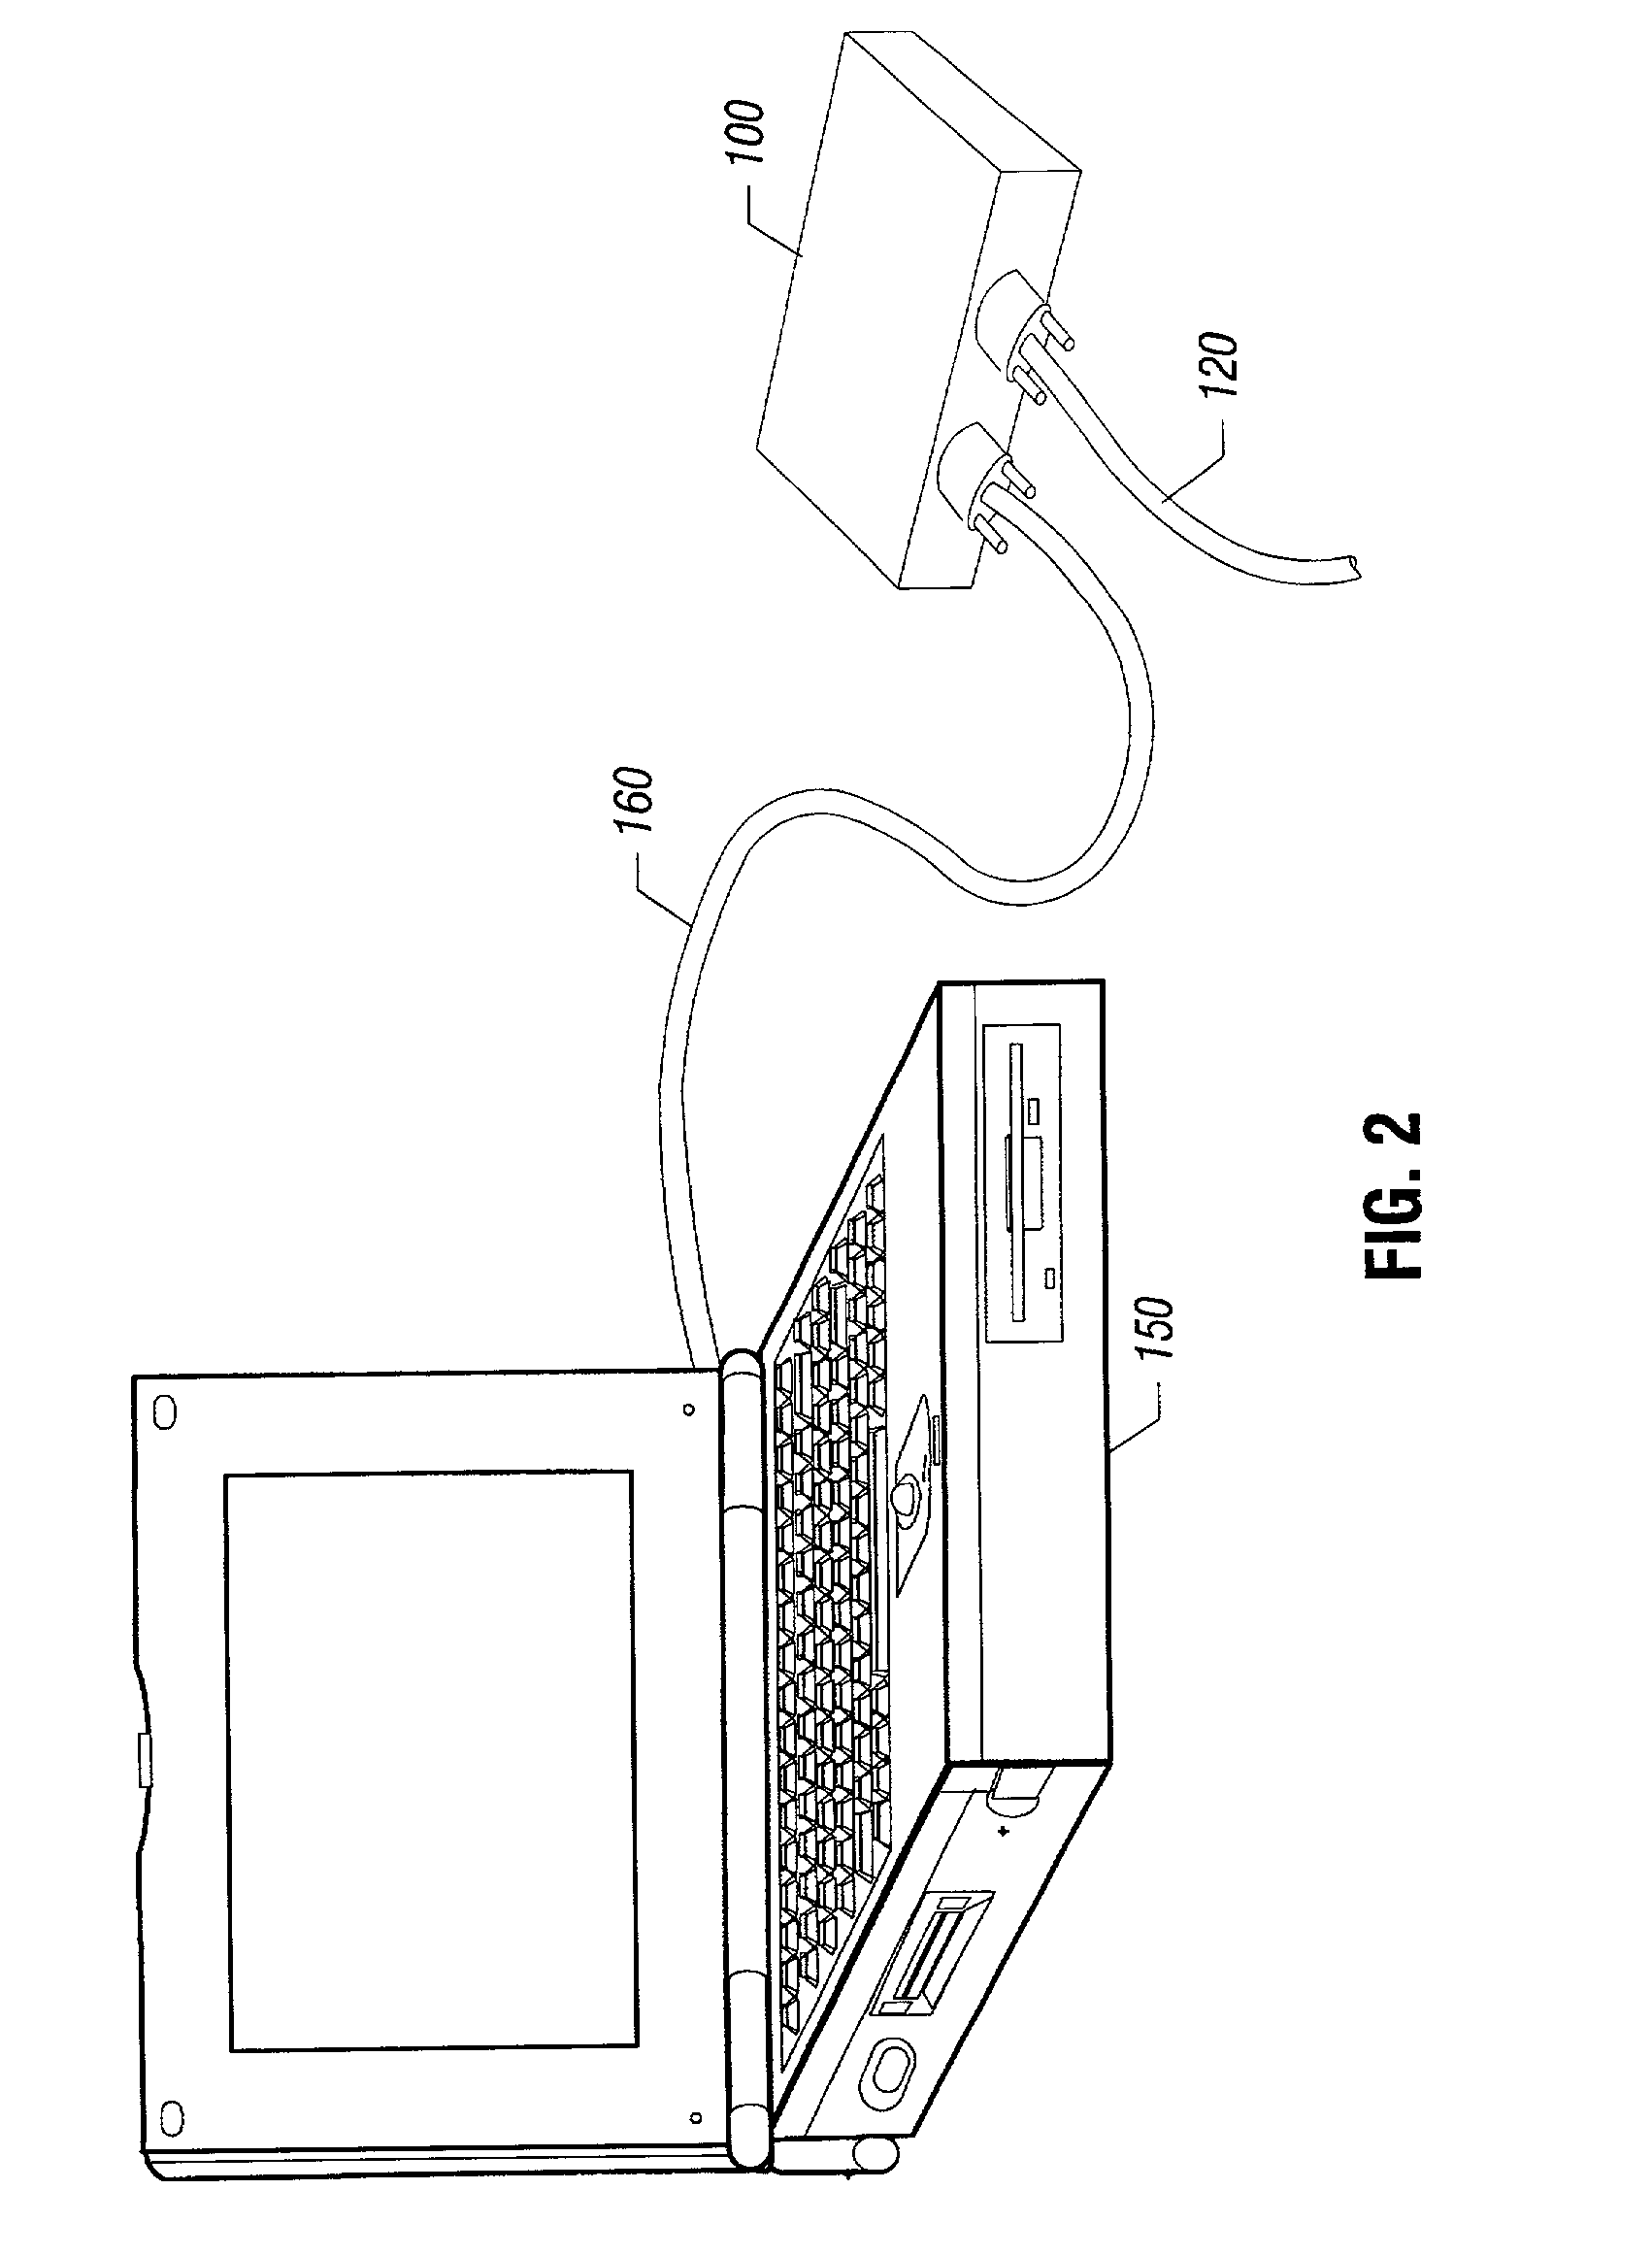 Methods and apparatus for using black box data to analyze vehicular accidents